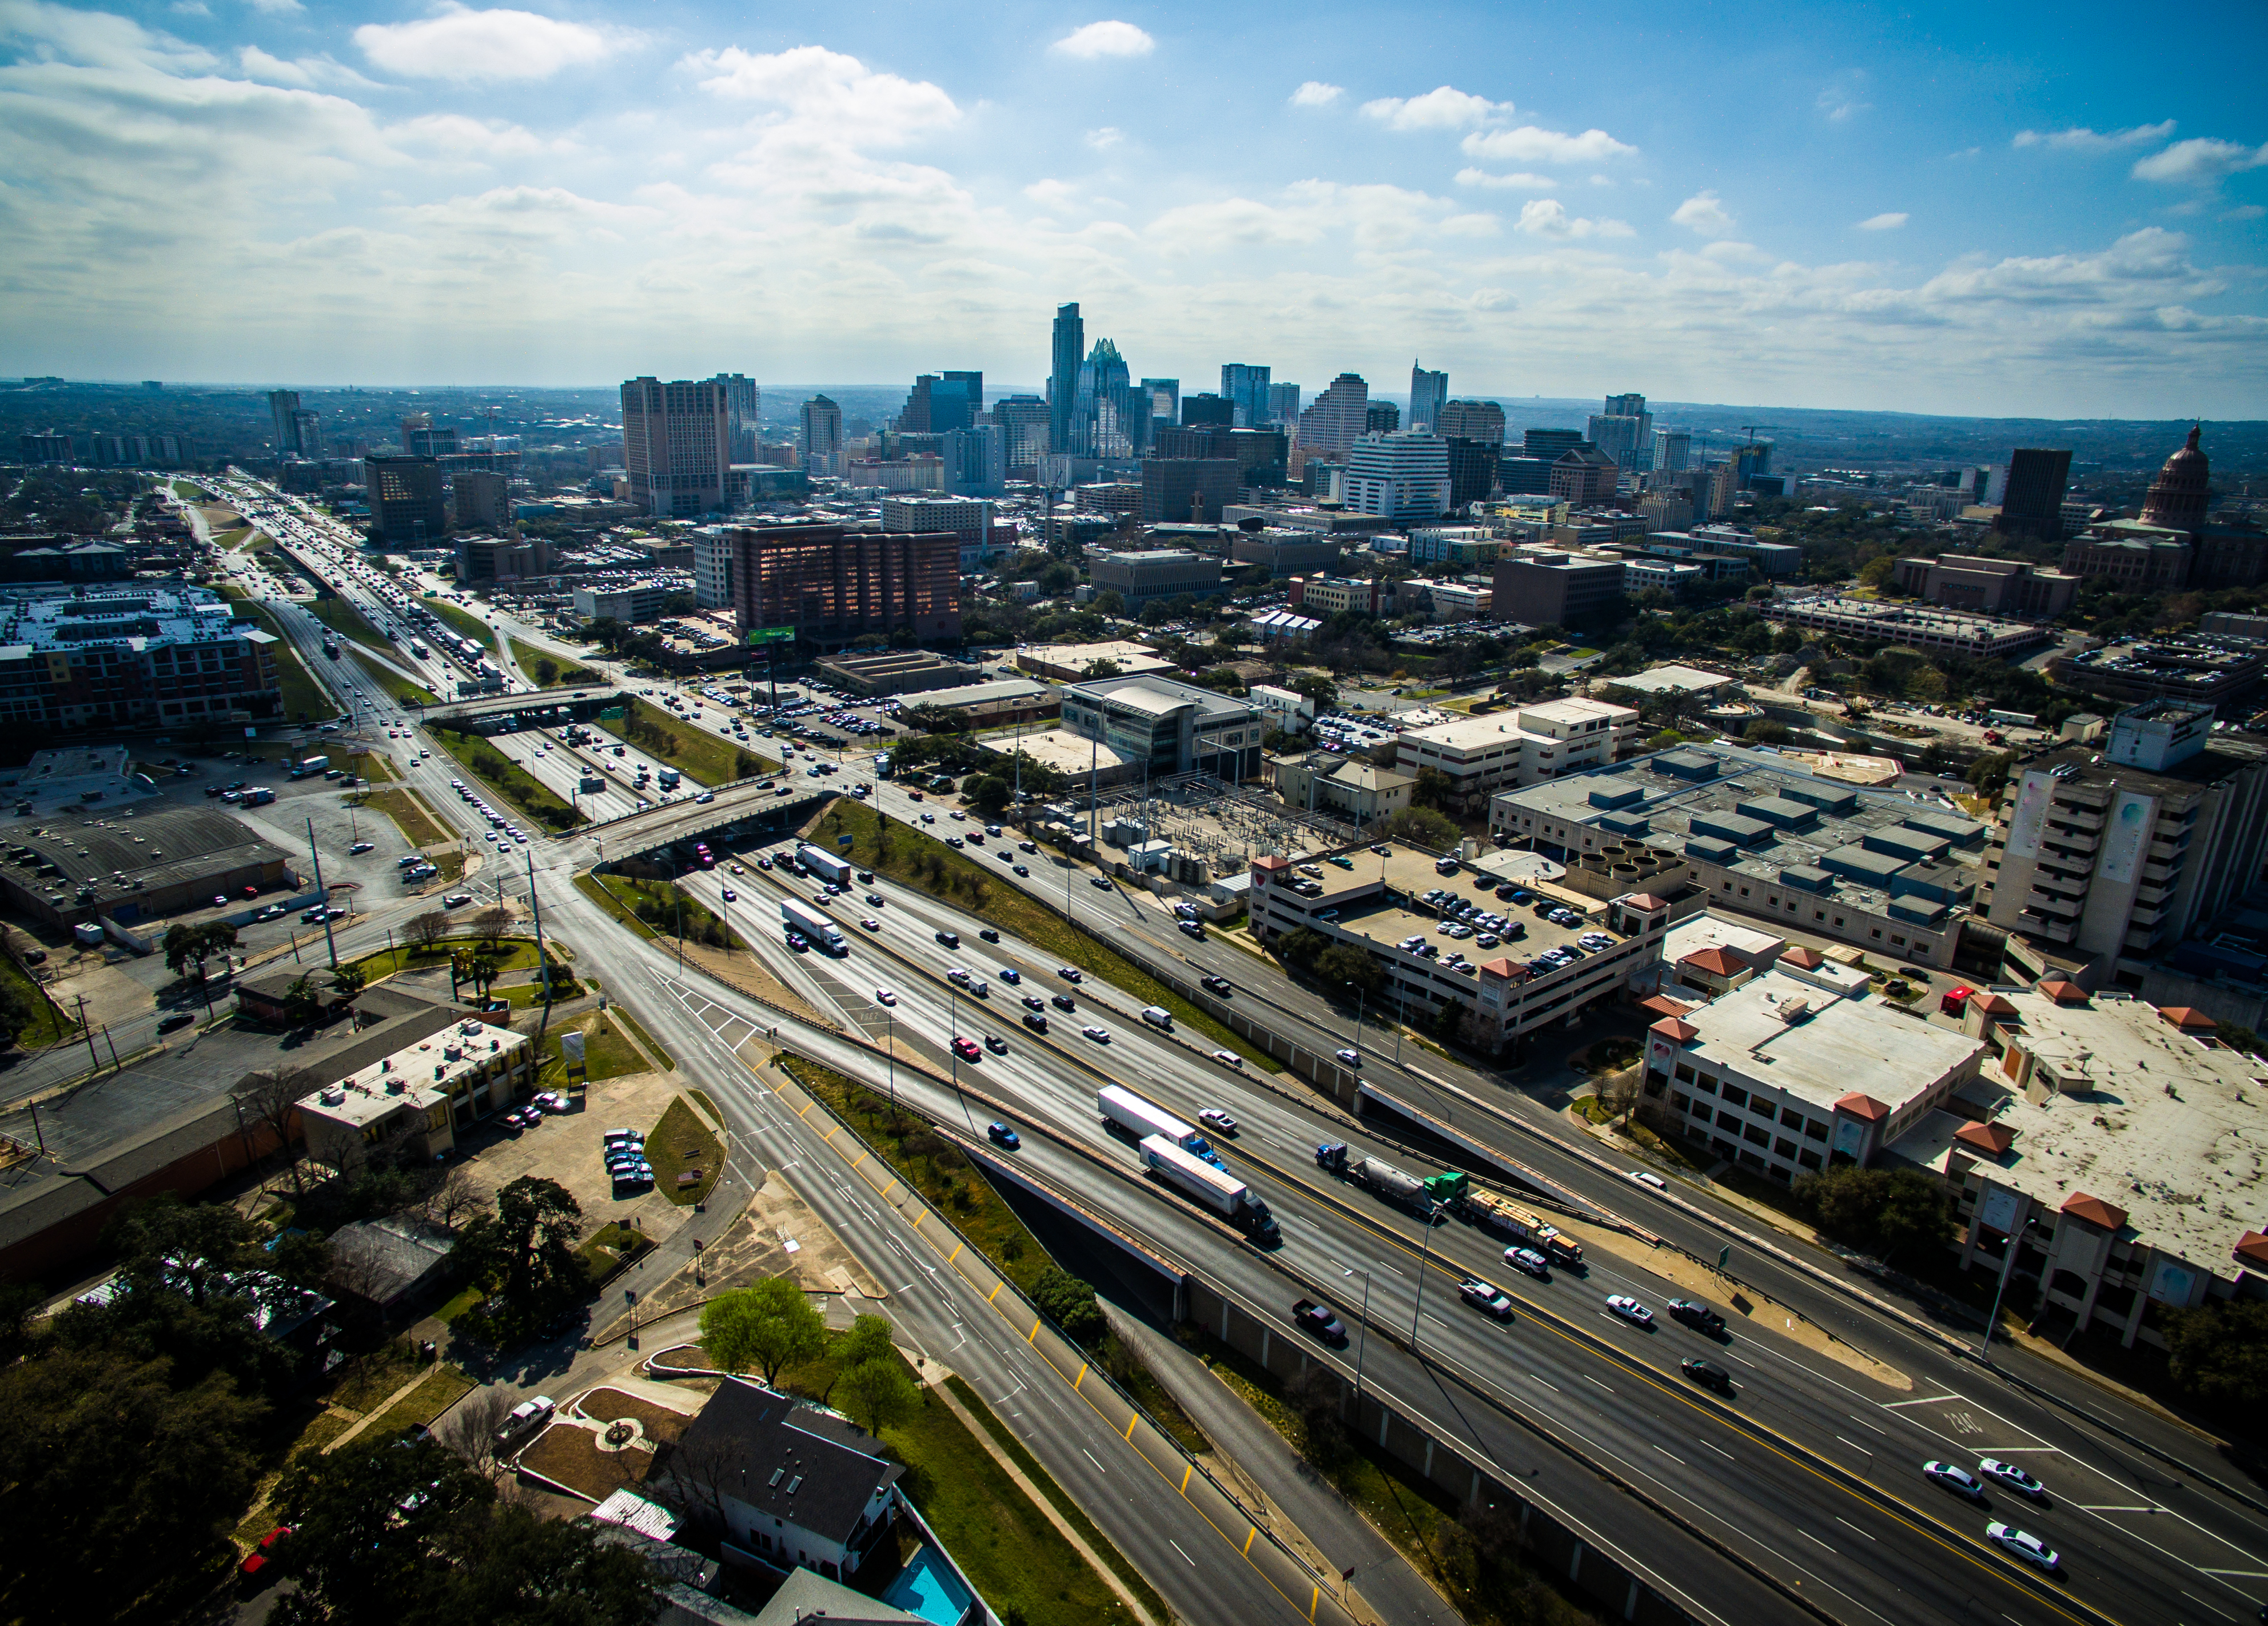 Overhead view of highways surrounded by medium-height buildings with a group of tall buildings in the background.